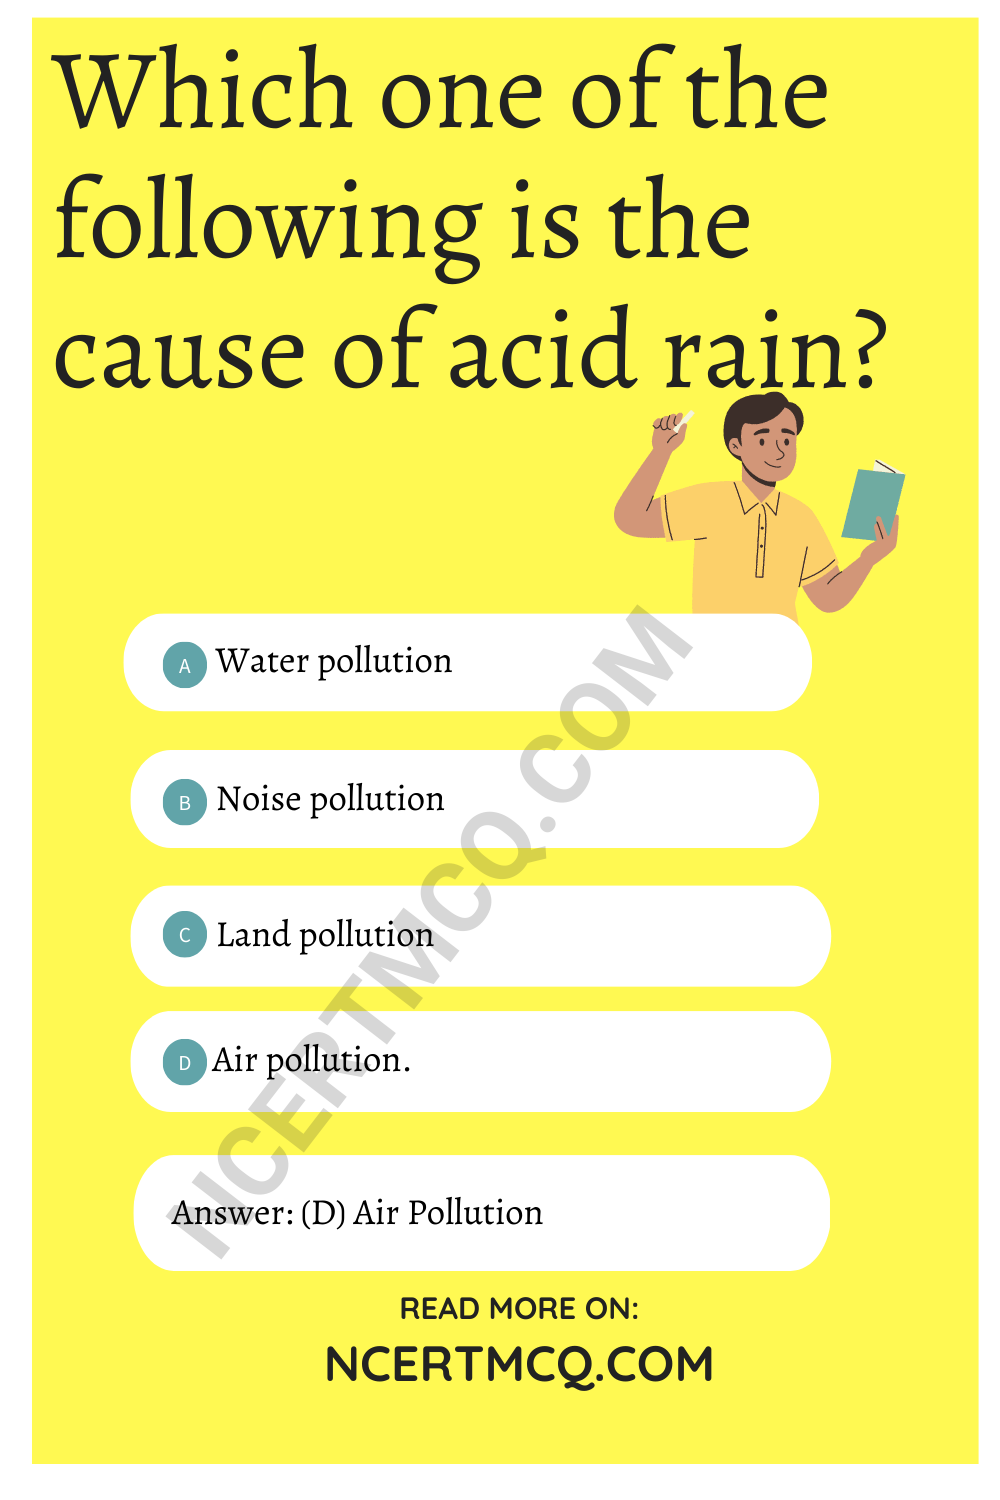 Which one of the following is the cause of acid rain?